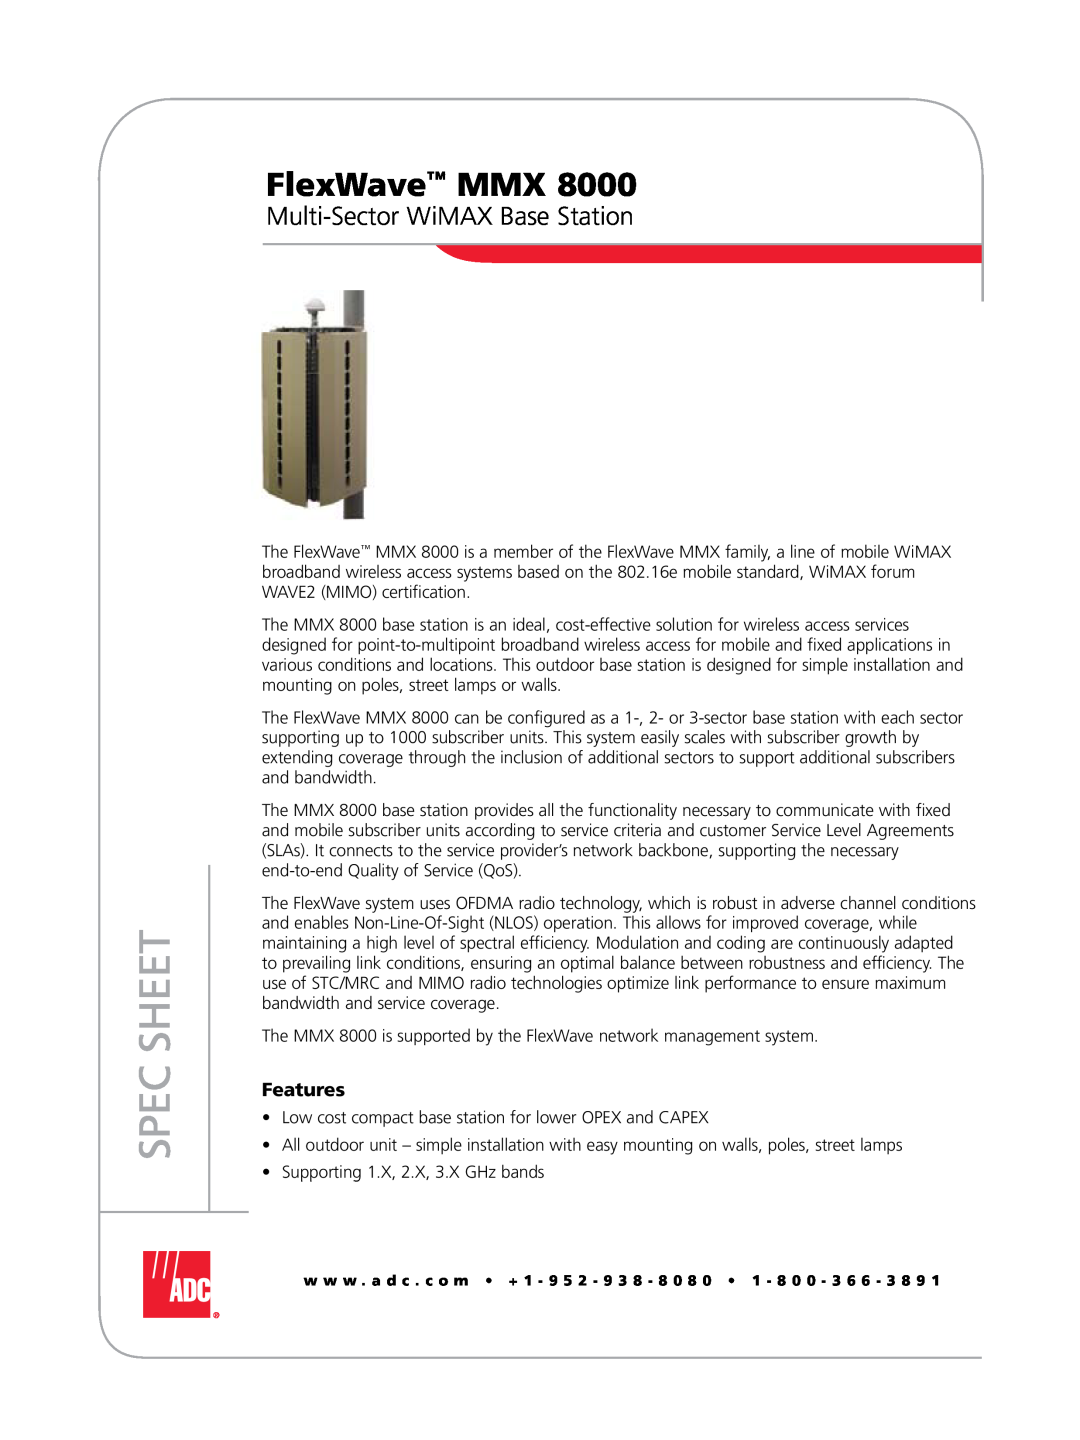 ADC MMX 8000 manual FlexWave MMX, Multi-Sector WiMAX Base Station, Spec Sheet, Features 